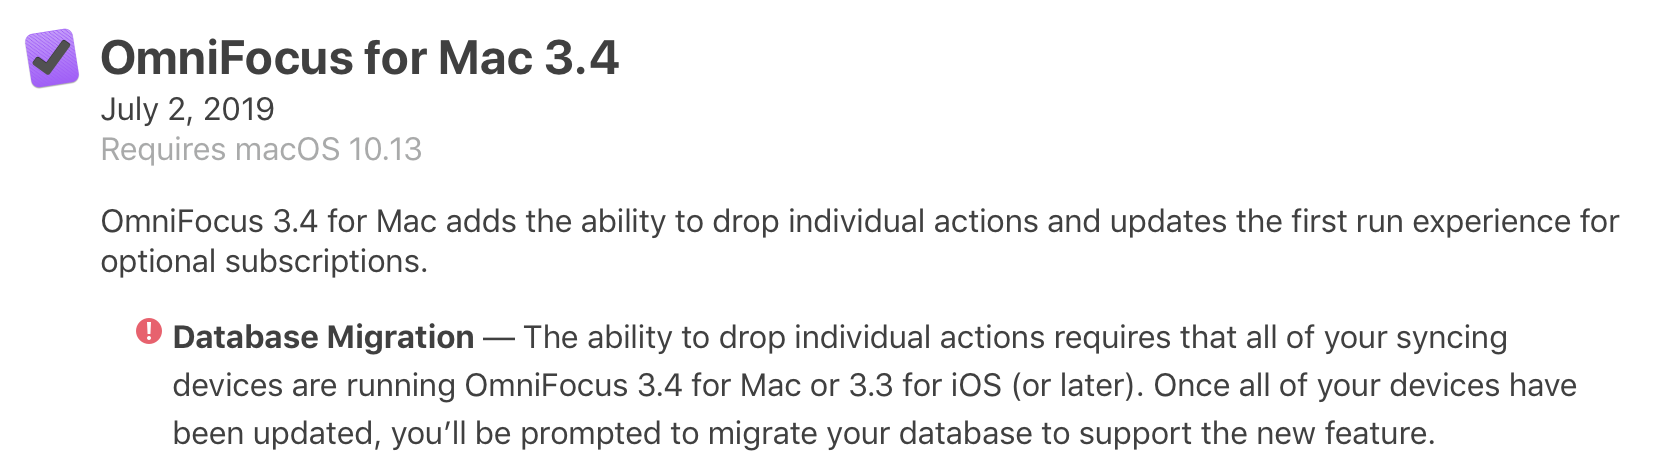 Release notes example for OmniFocus 3.4